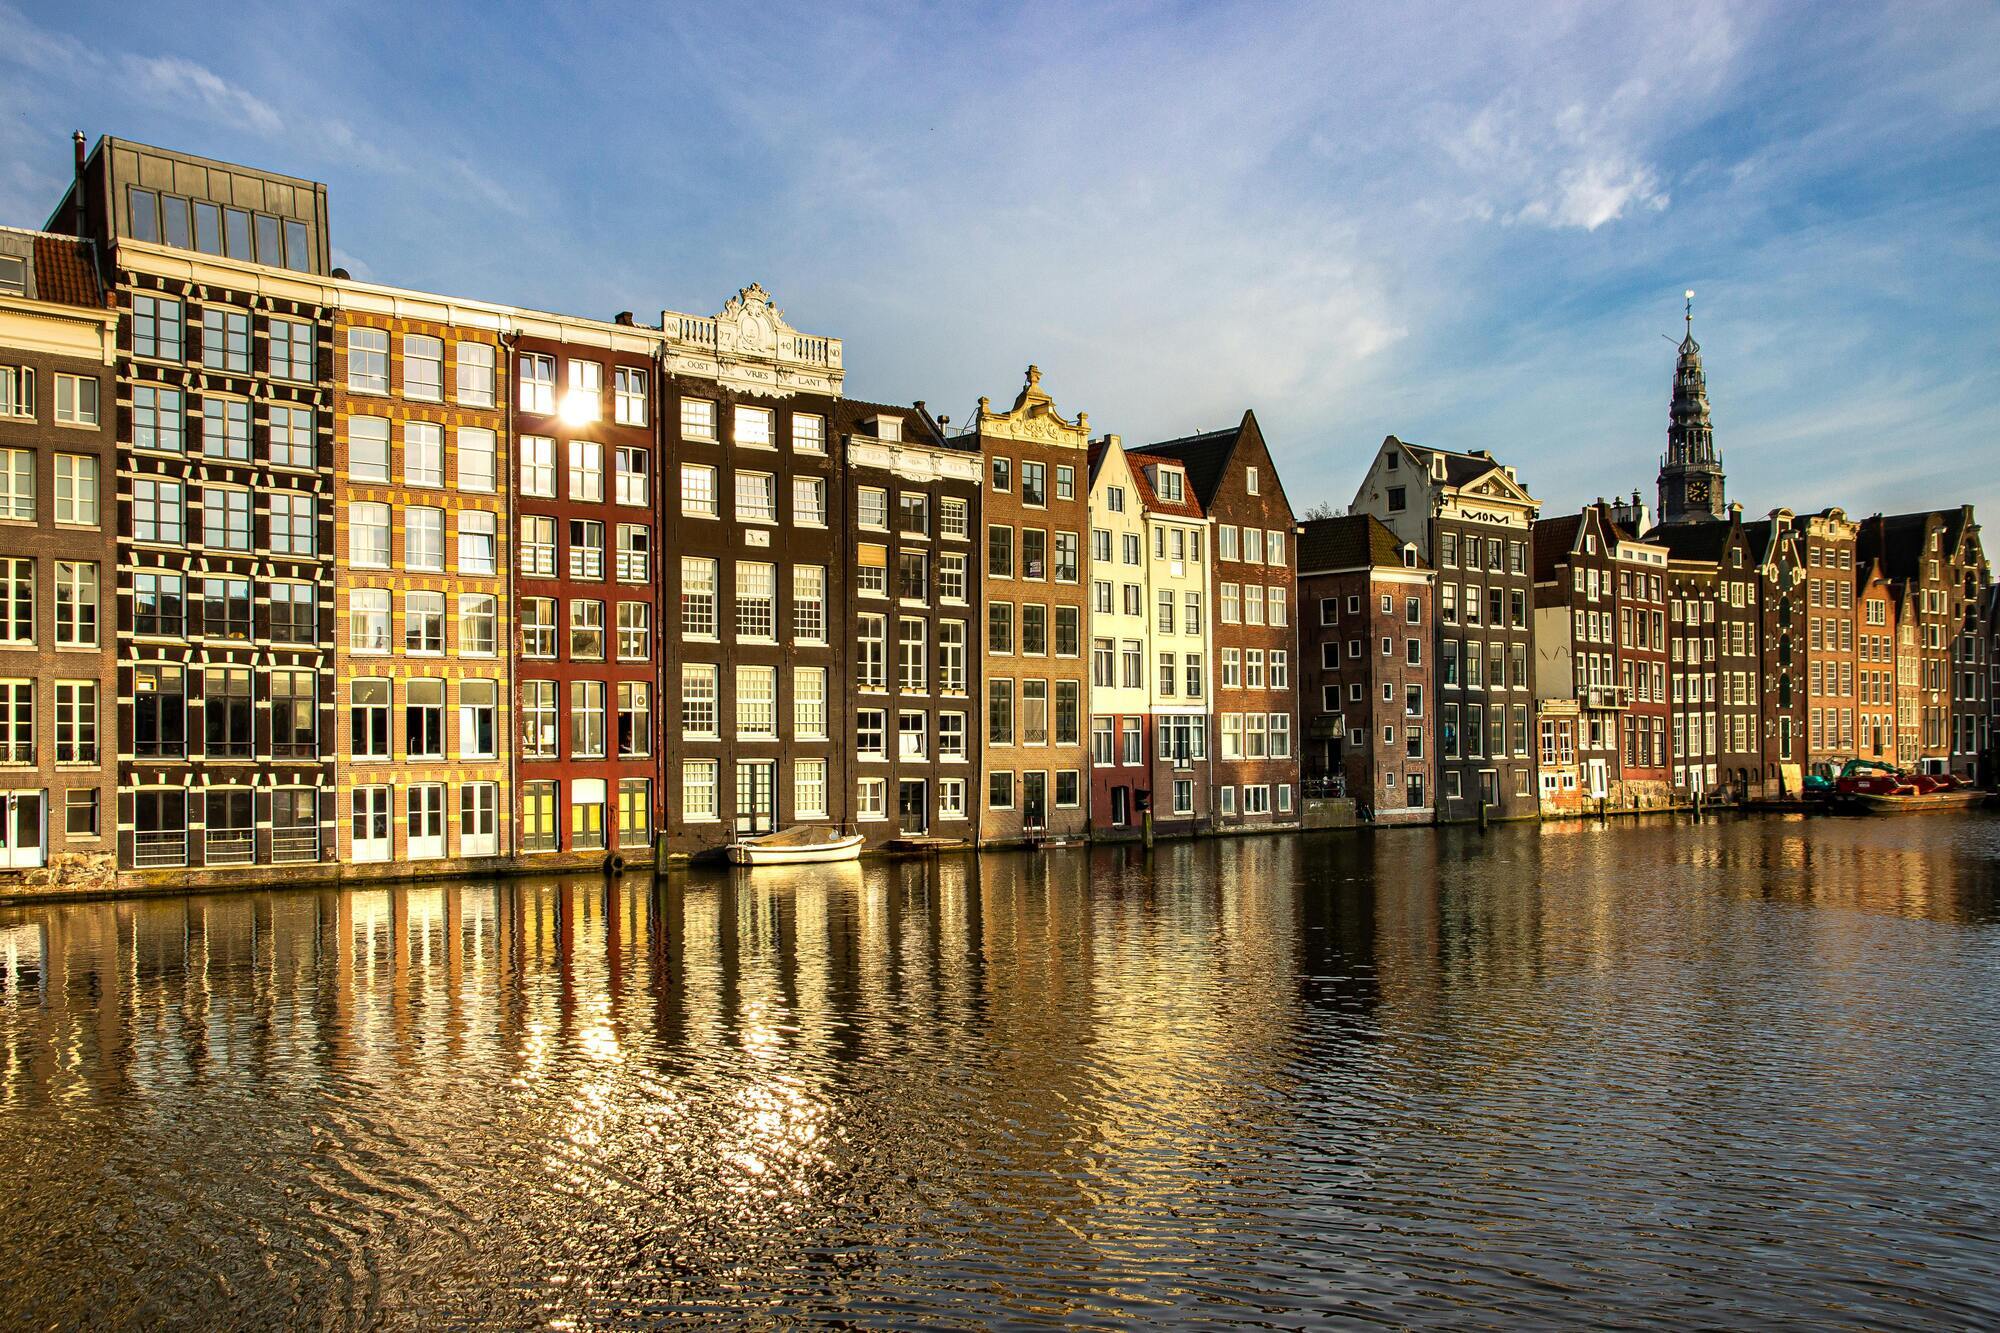 Top 10 best cities to live in the world with high living standards and opportunities